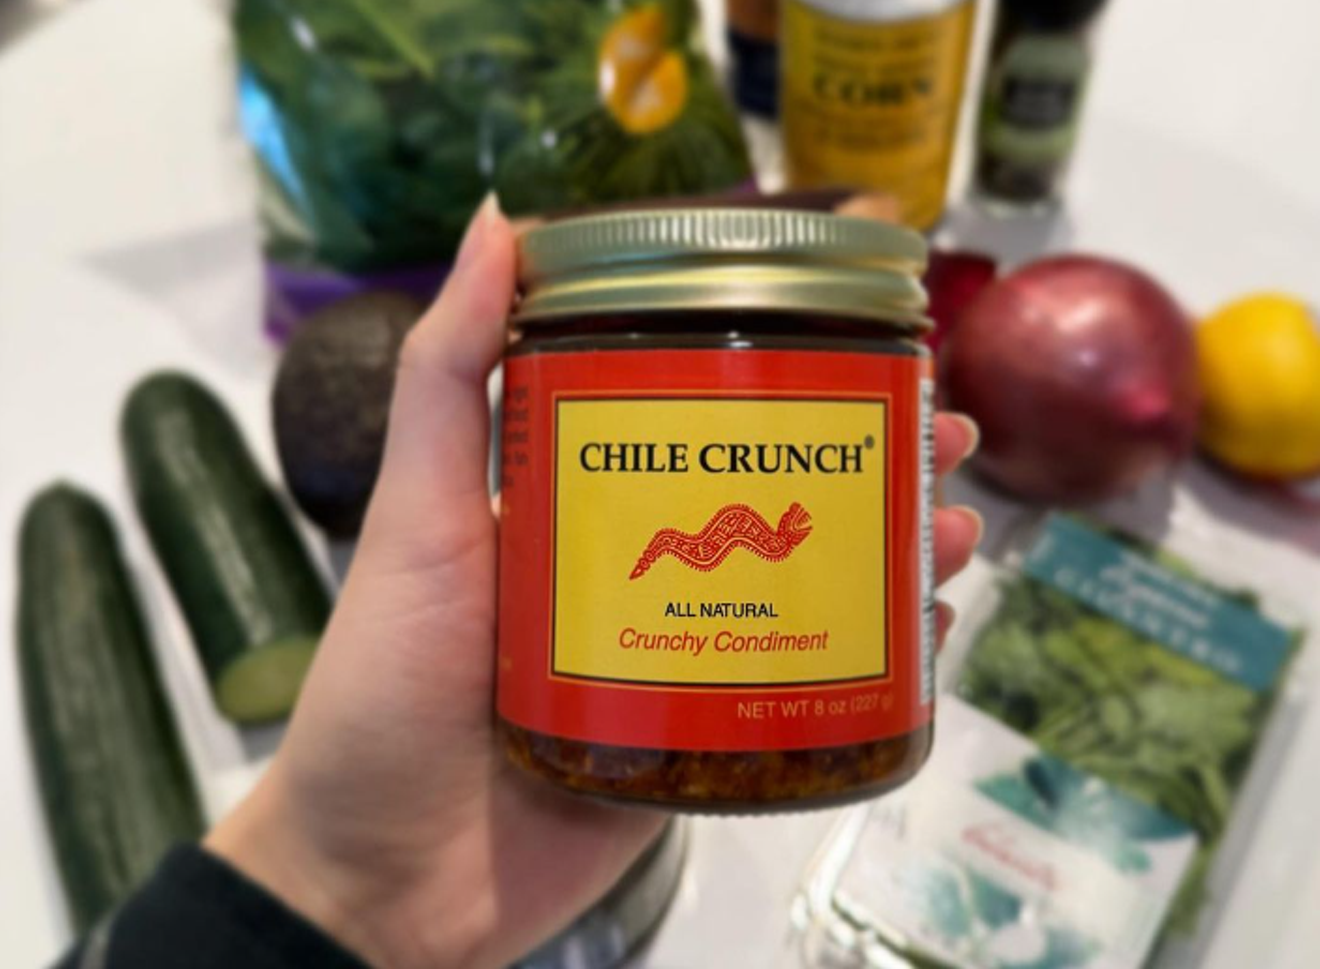 Susie Hojel launched Chile Crunch in 2008, long before Momofuku introduced its version.